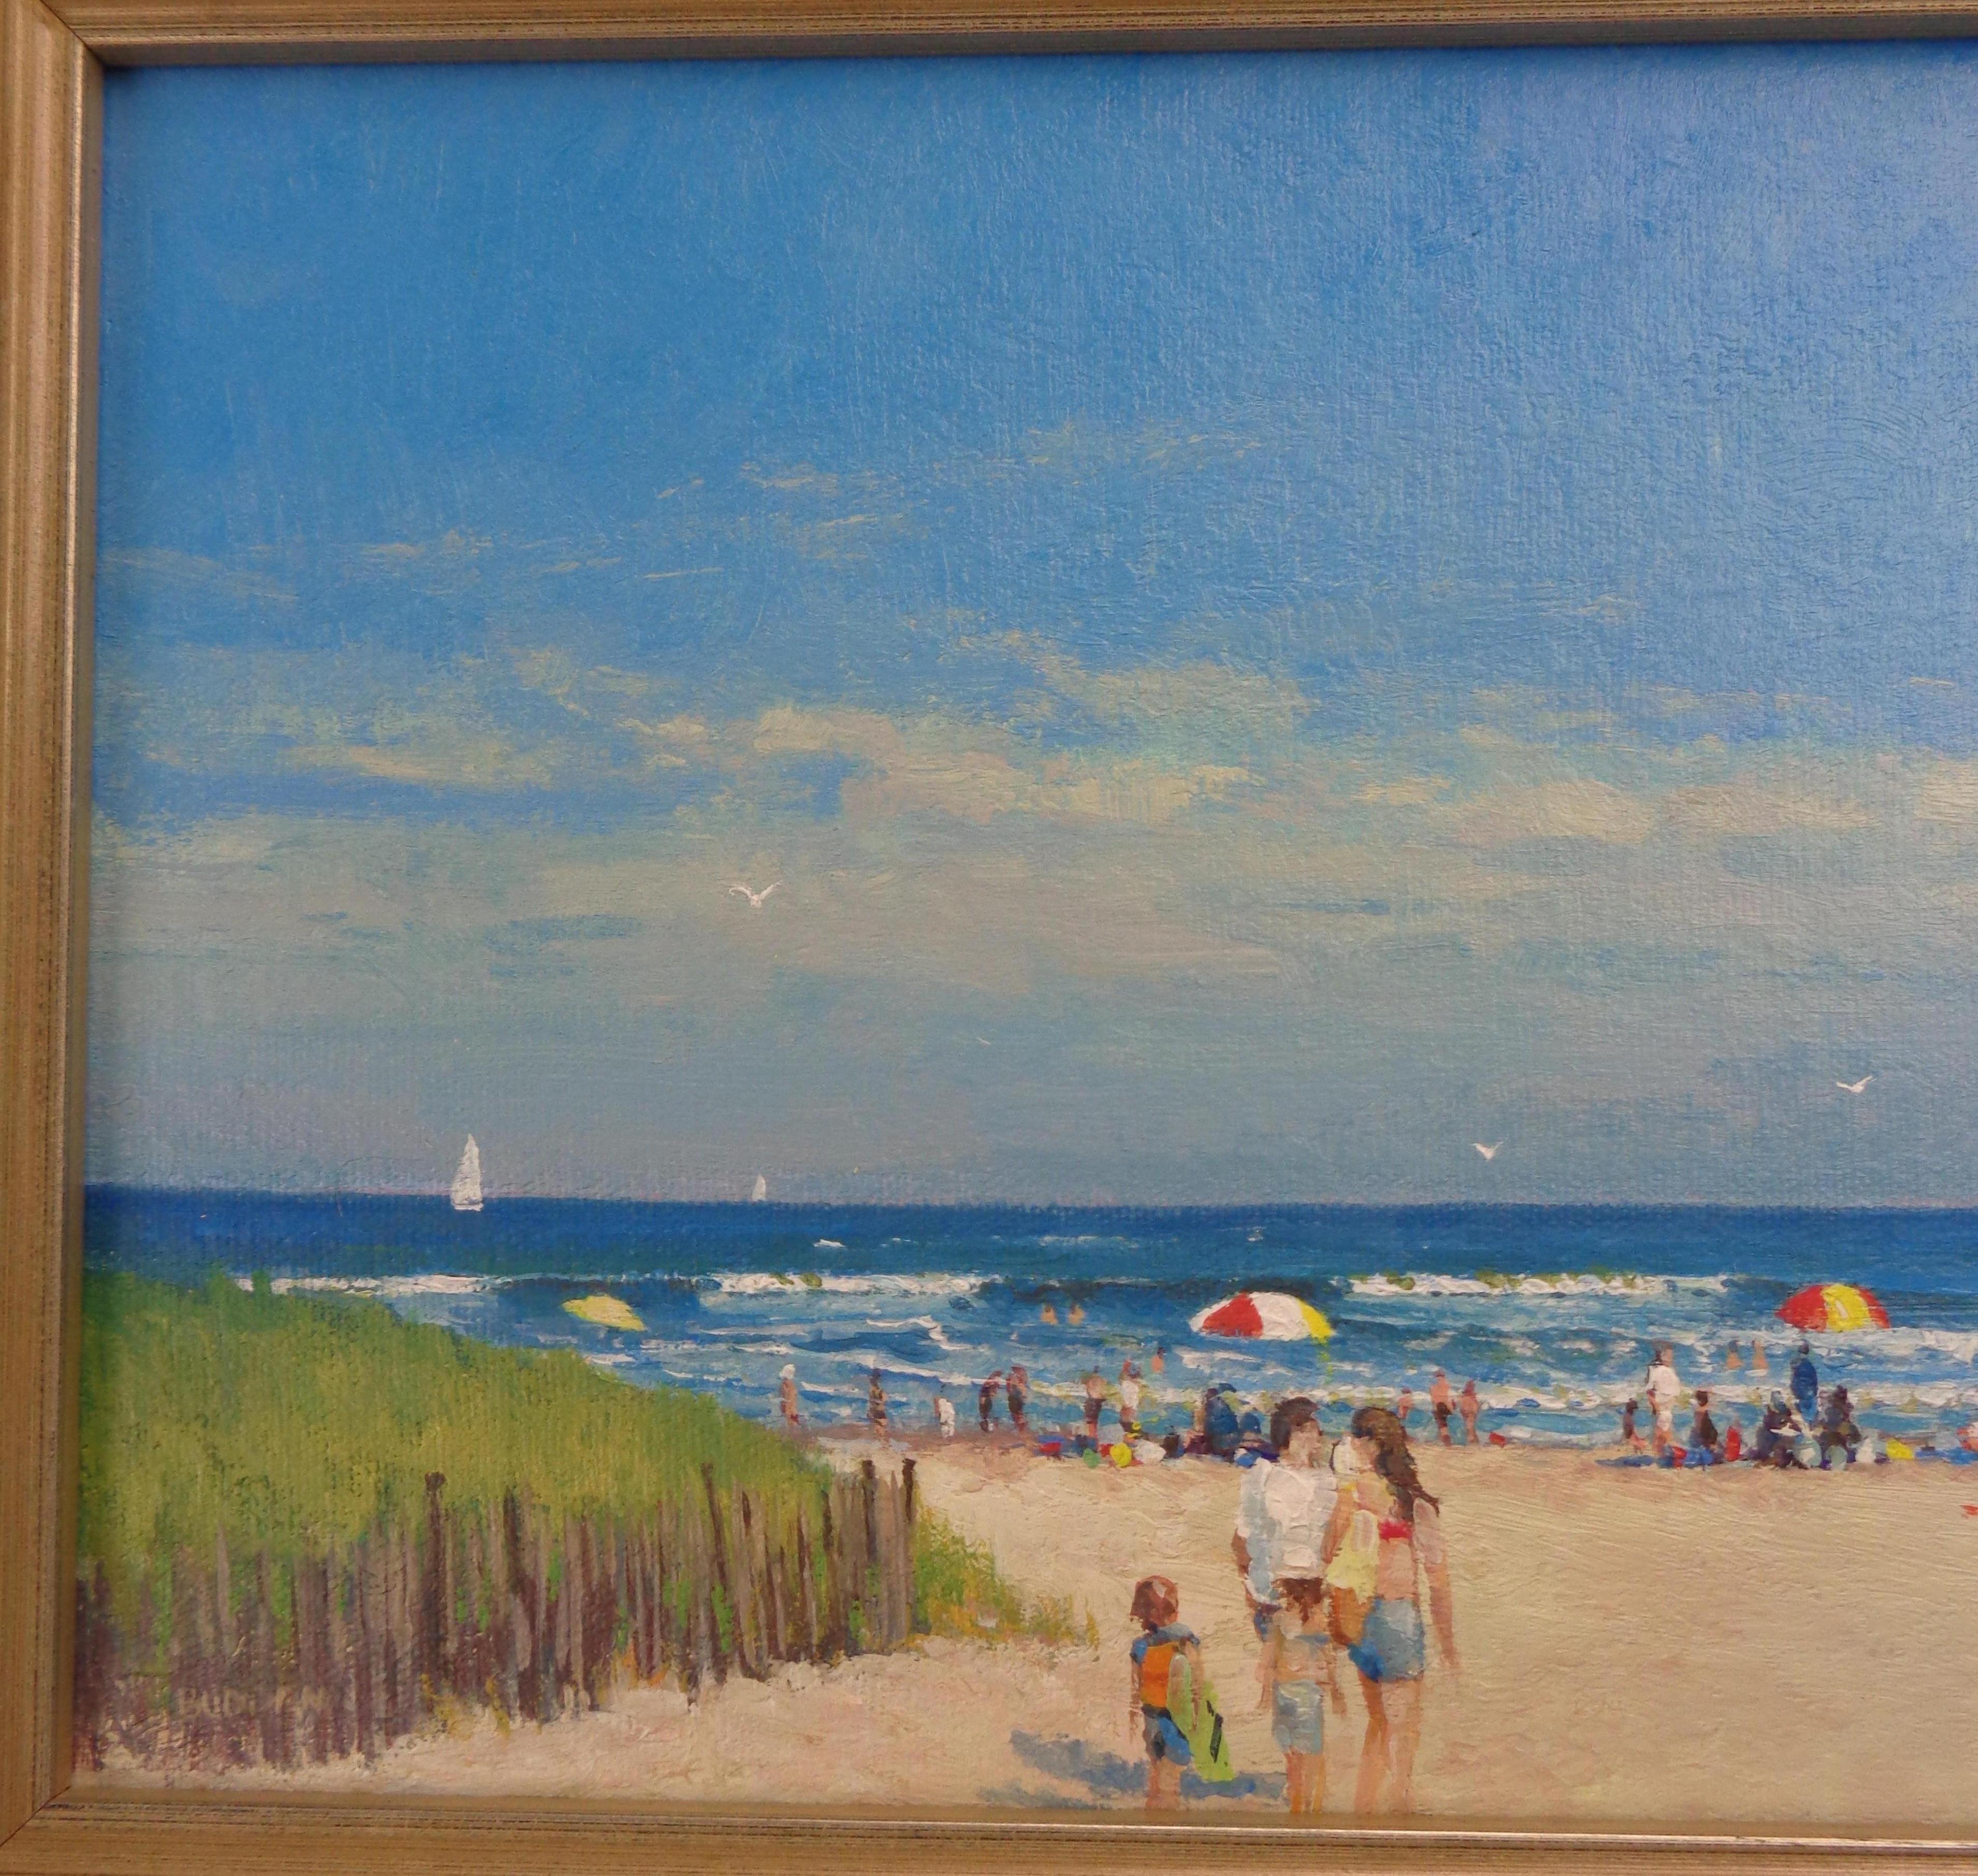 Beach & Ocean Impressionistic Seascape Oil Painting Michael Budden To The Beach  2